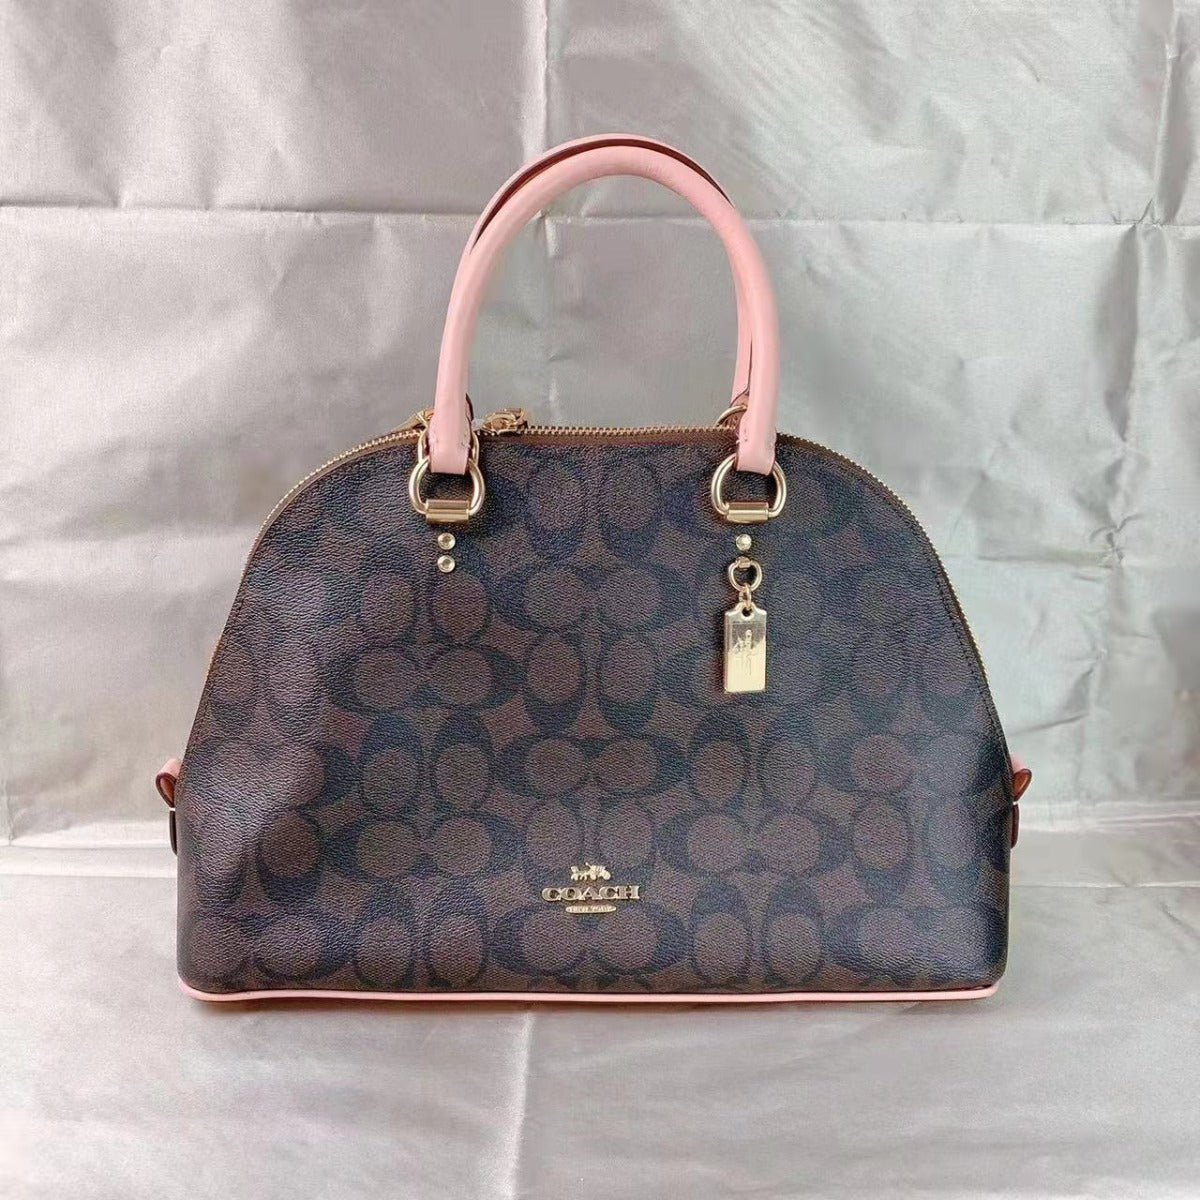 COACH 2558 KATY SATCHEL IN SIGNATURE CANVAS GOLD/BROWN SHELL PINK 195031391897